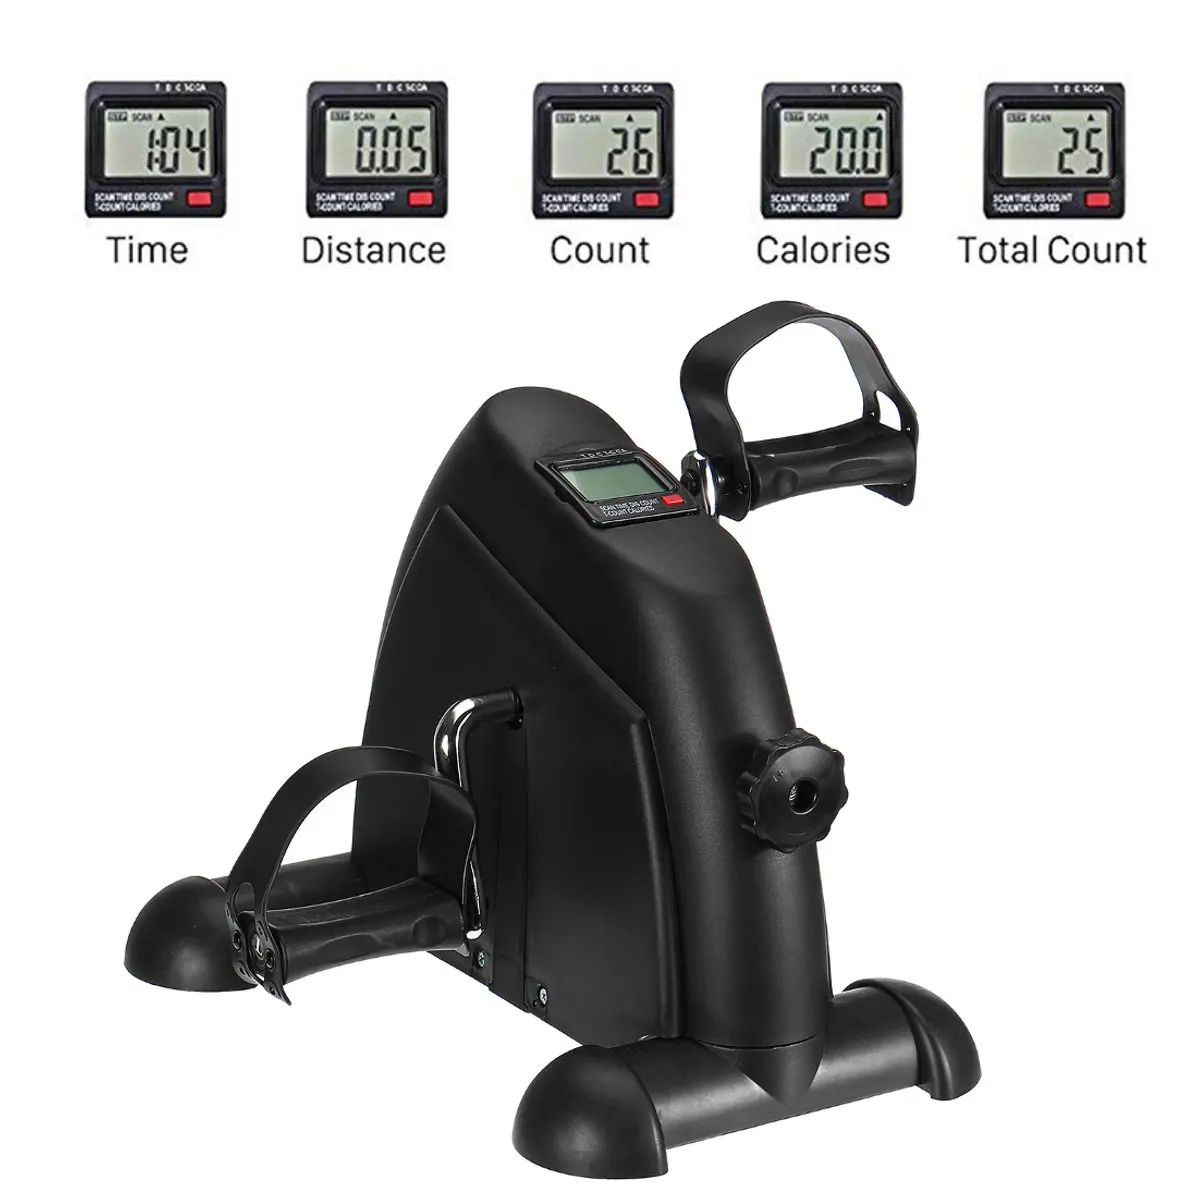 Mini Pedal Stepper Bike Indoor Cycling Fitness Exerciser 4 Leg LCD Display Black for sale online 